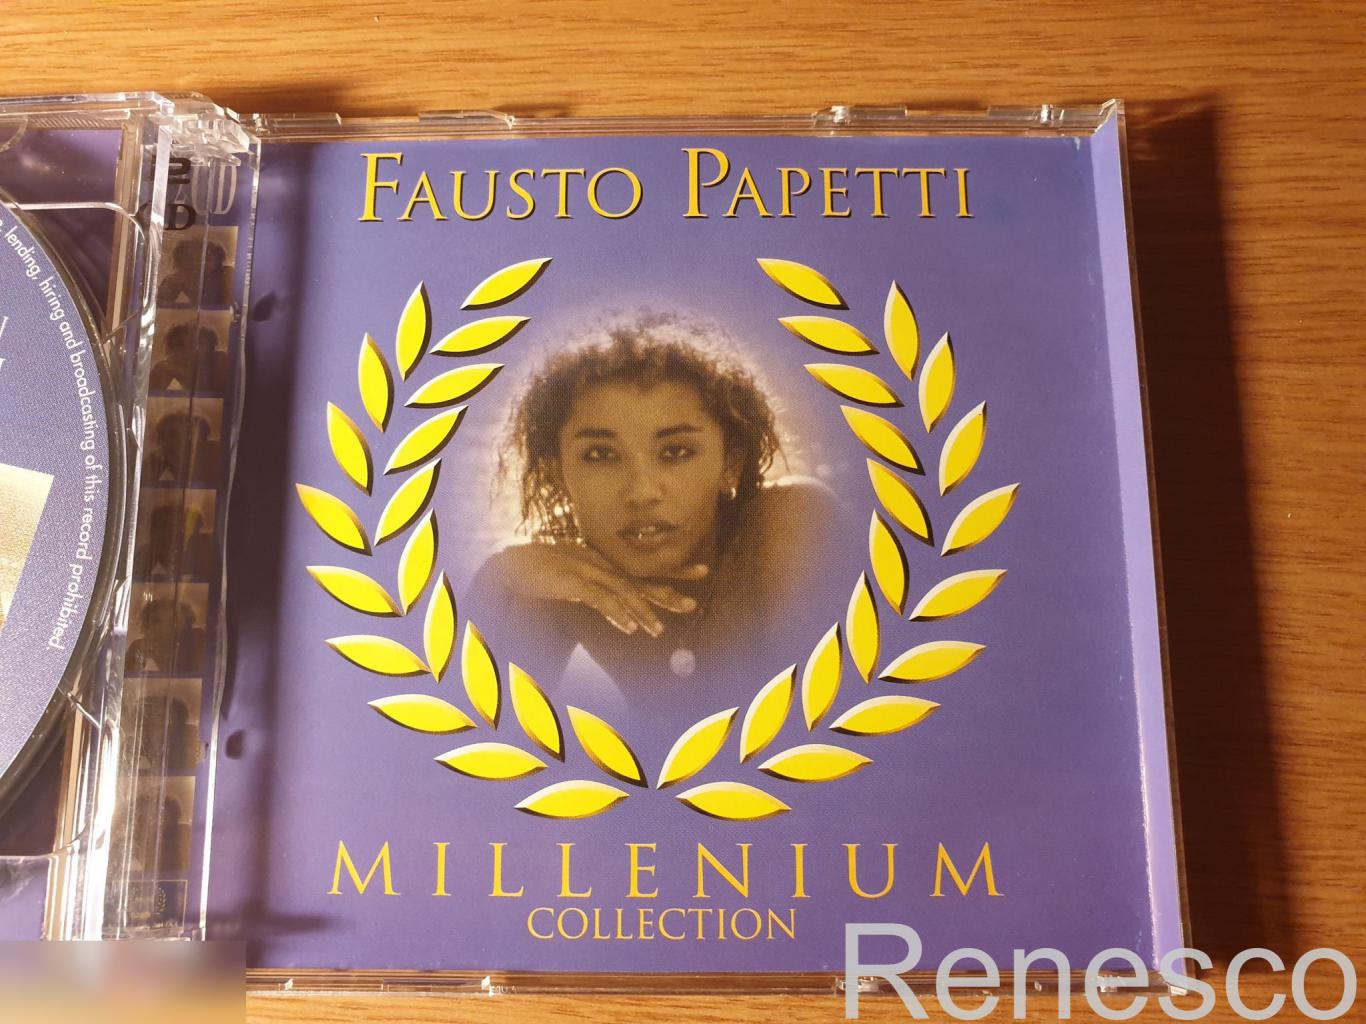 (2CD) Fausto Papetti - Millenium Collection (1999) (Germany) 7